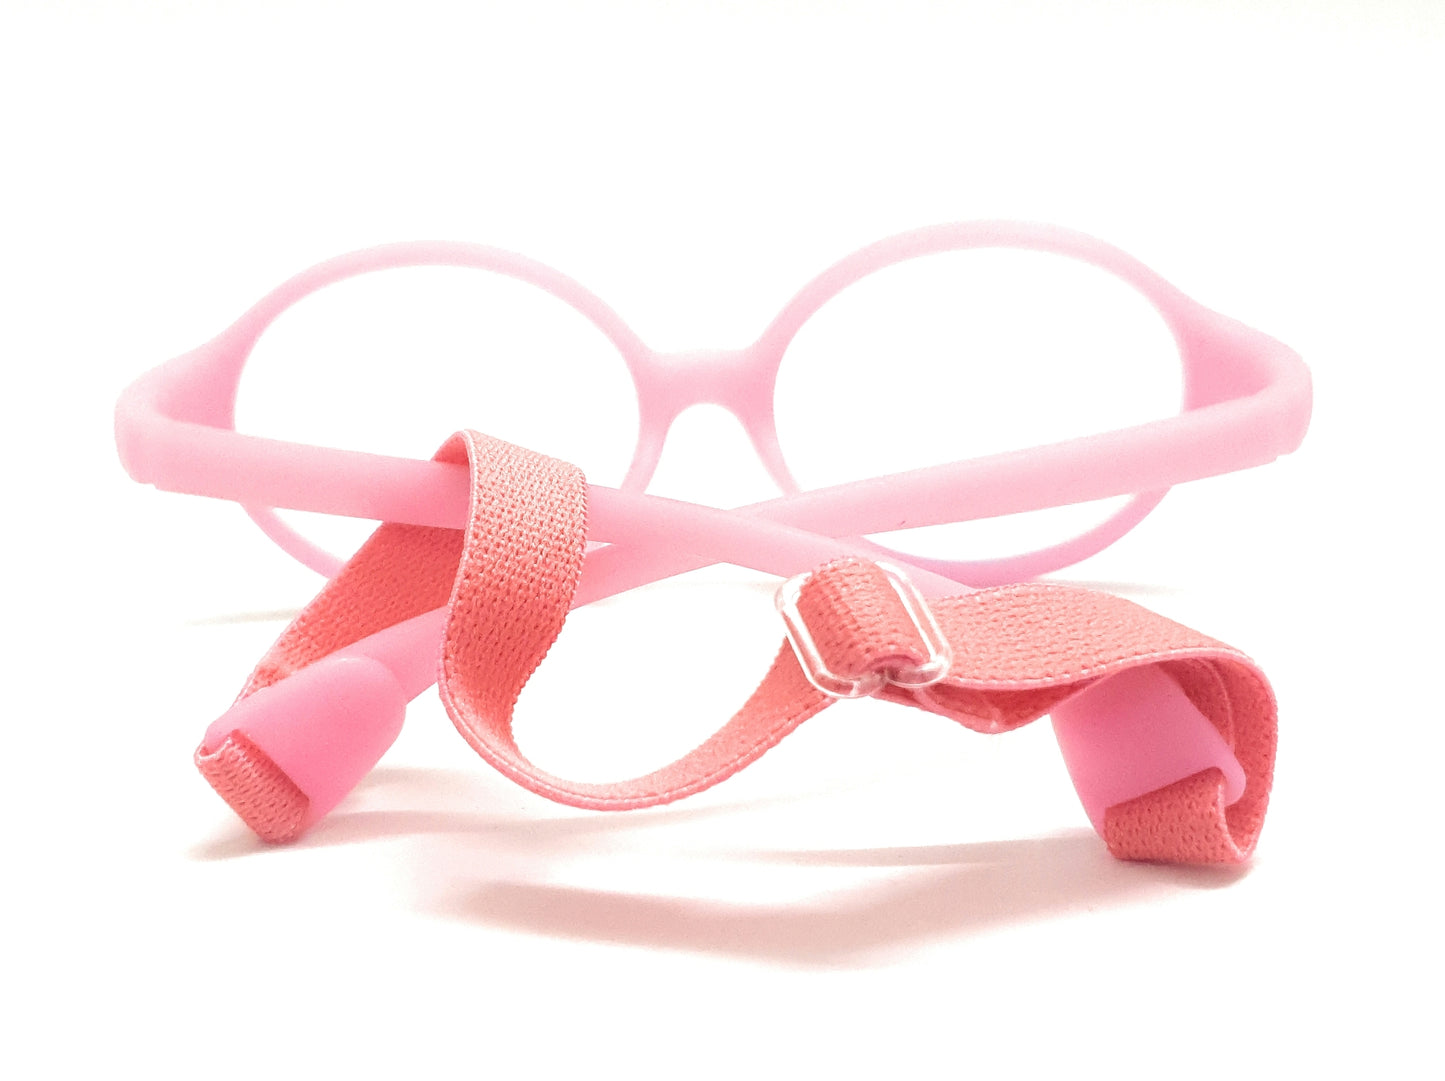 Affaires Blue Ray Block glasses Frames for Kids, Flexible, Bendable, No Screws, Glasses with anti-reflection |  BC-279 (Baby Pink)